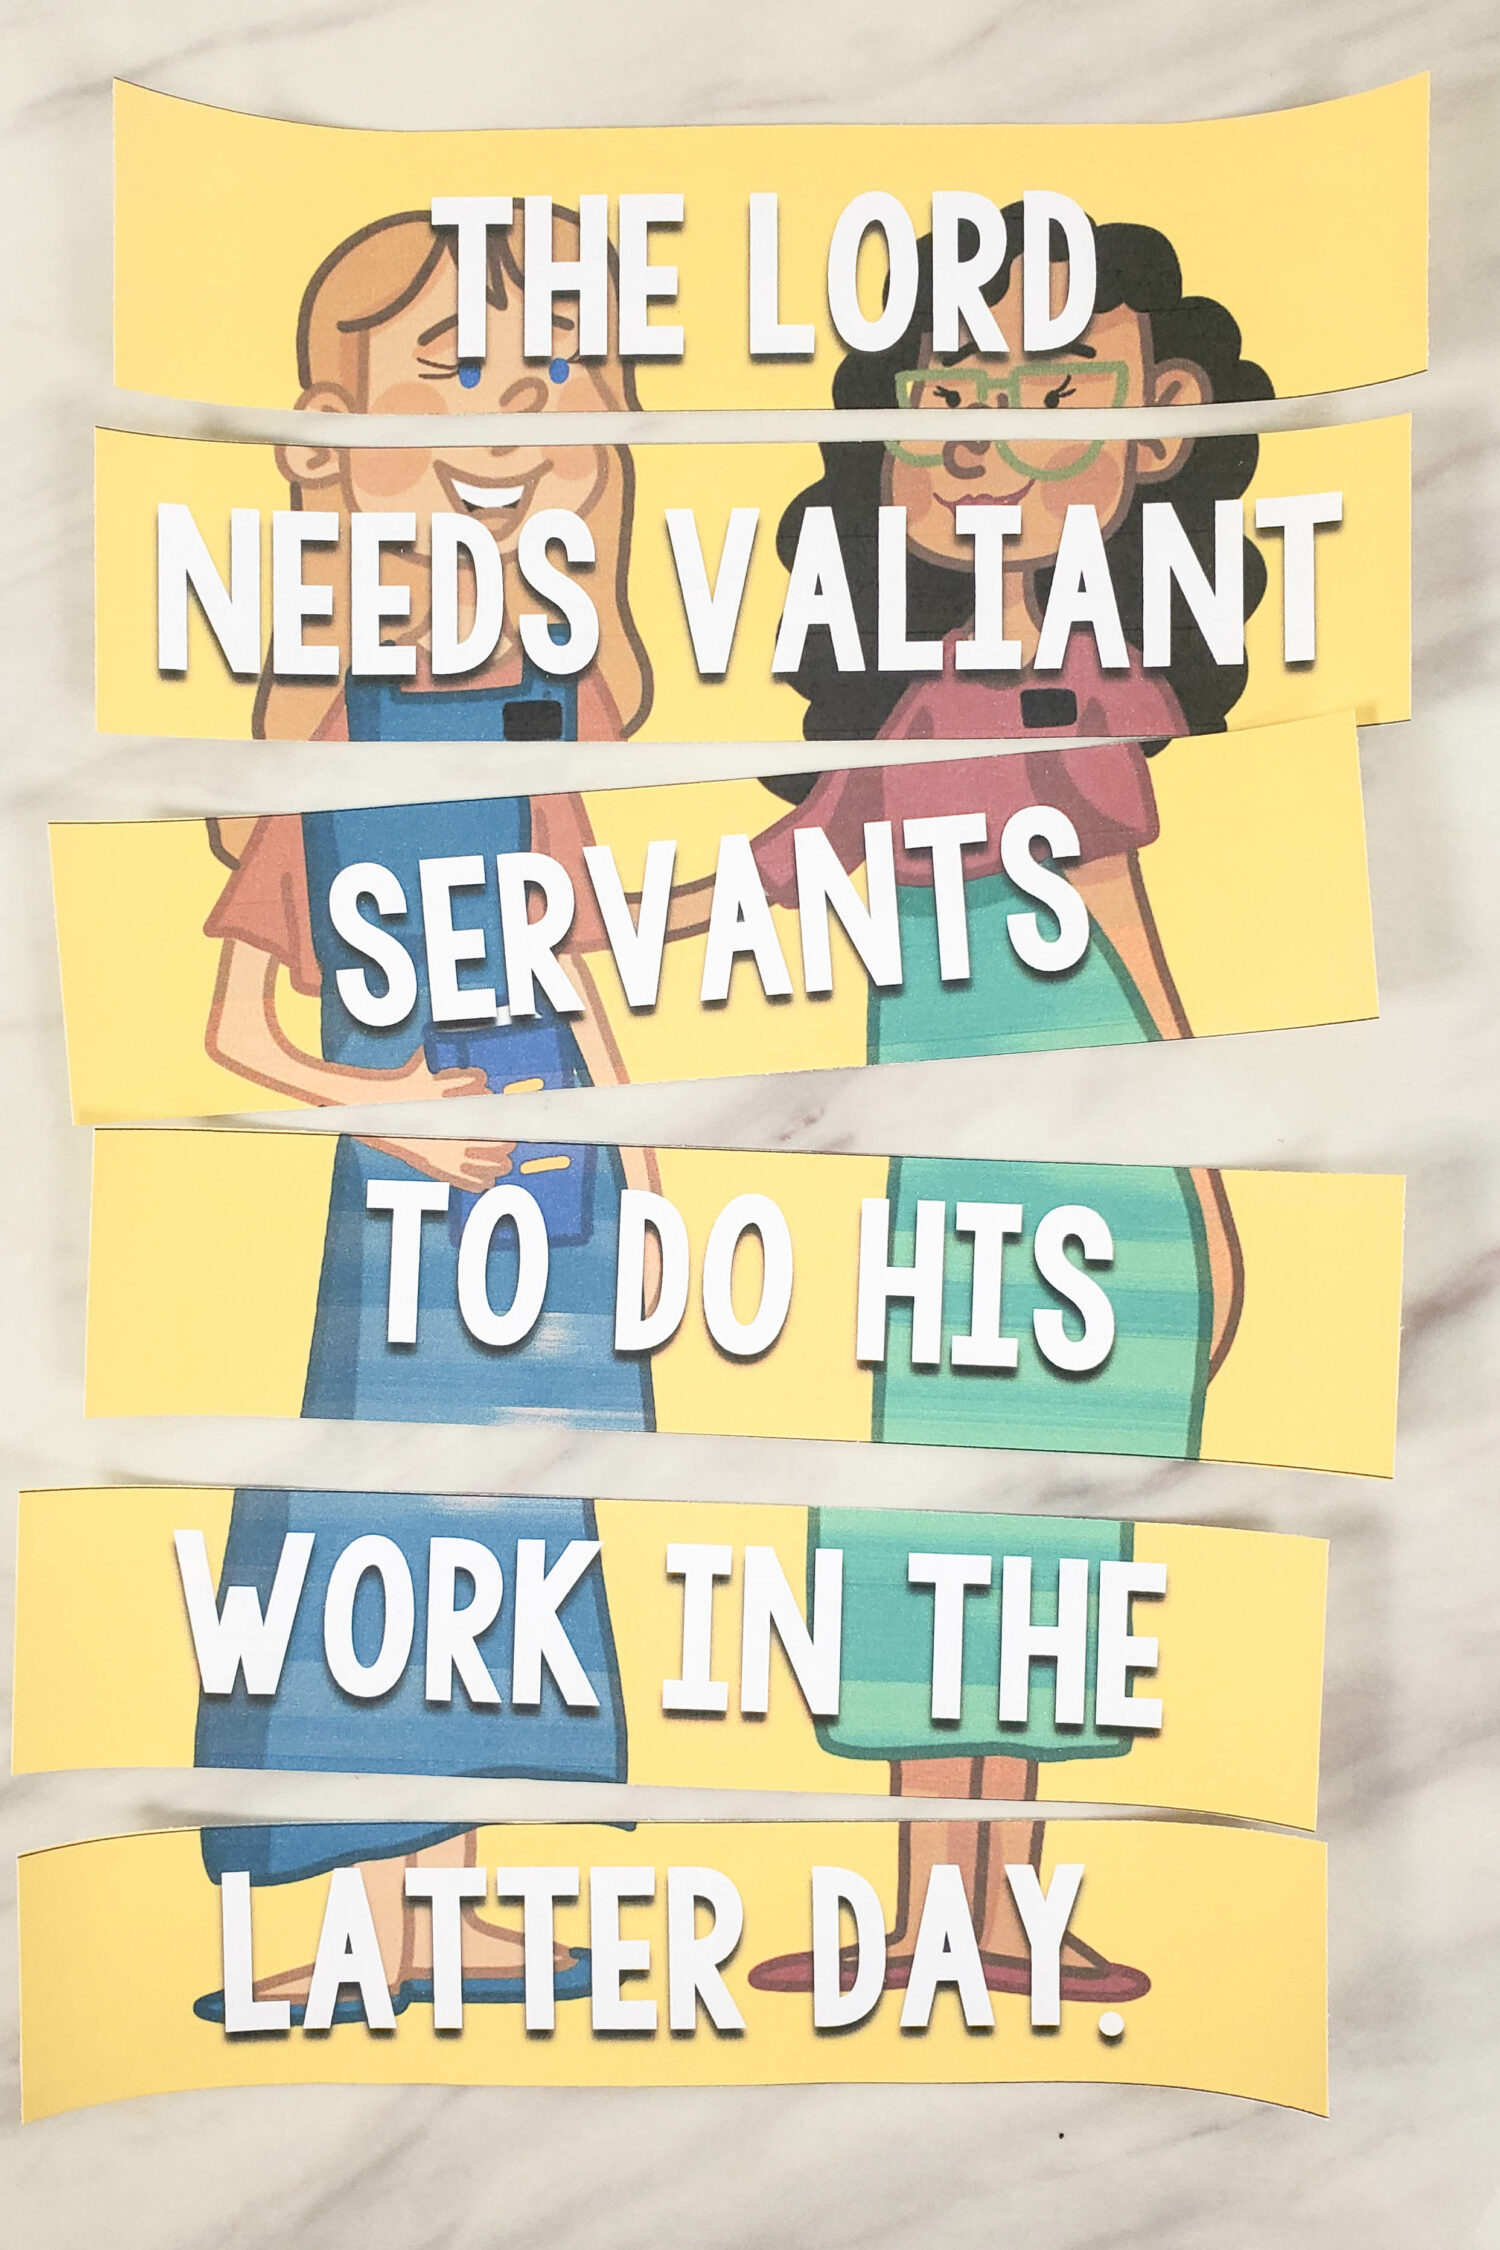 I Will Be Valiant Picture Puzzles fun singing time activity! Cut out this picture puzzle with lyrics and have the Primary children help you put it back in the correct order. Printable song helps for LDS Primary music leaders.